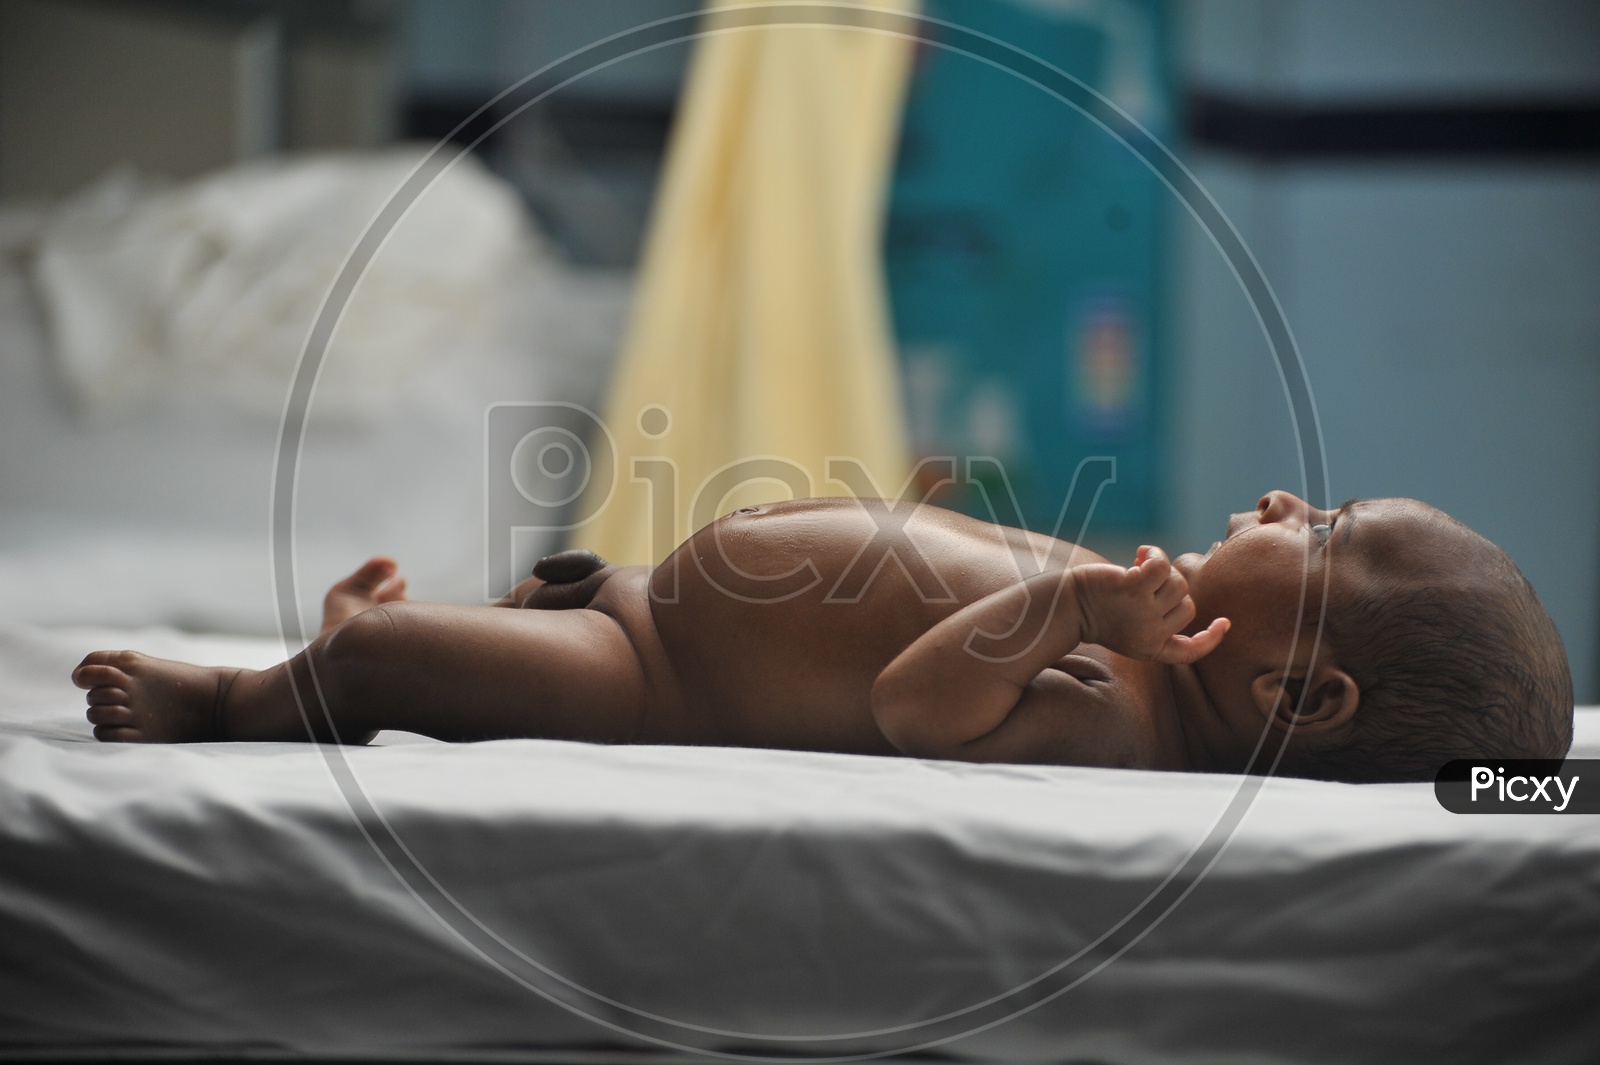 New Born Baby Child In Hospital bed